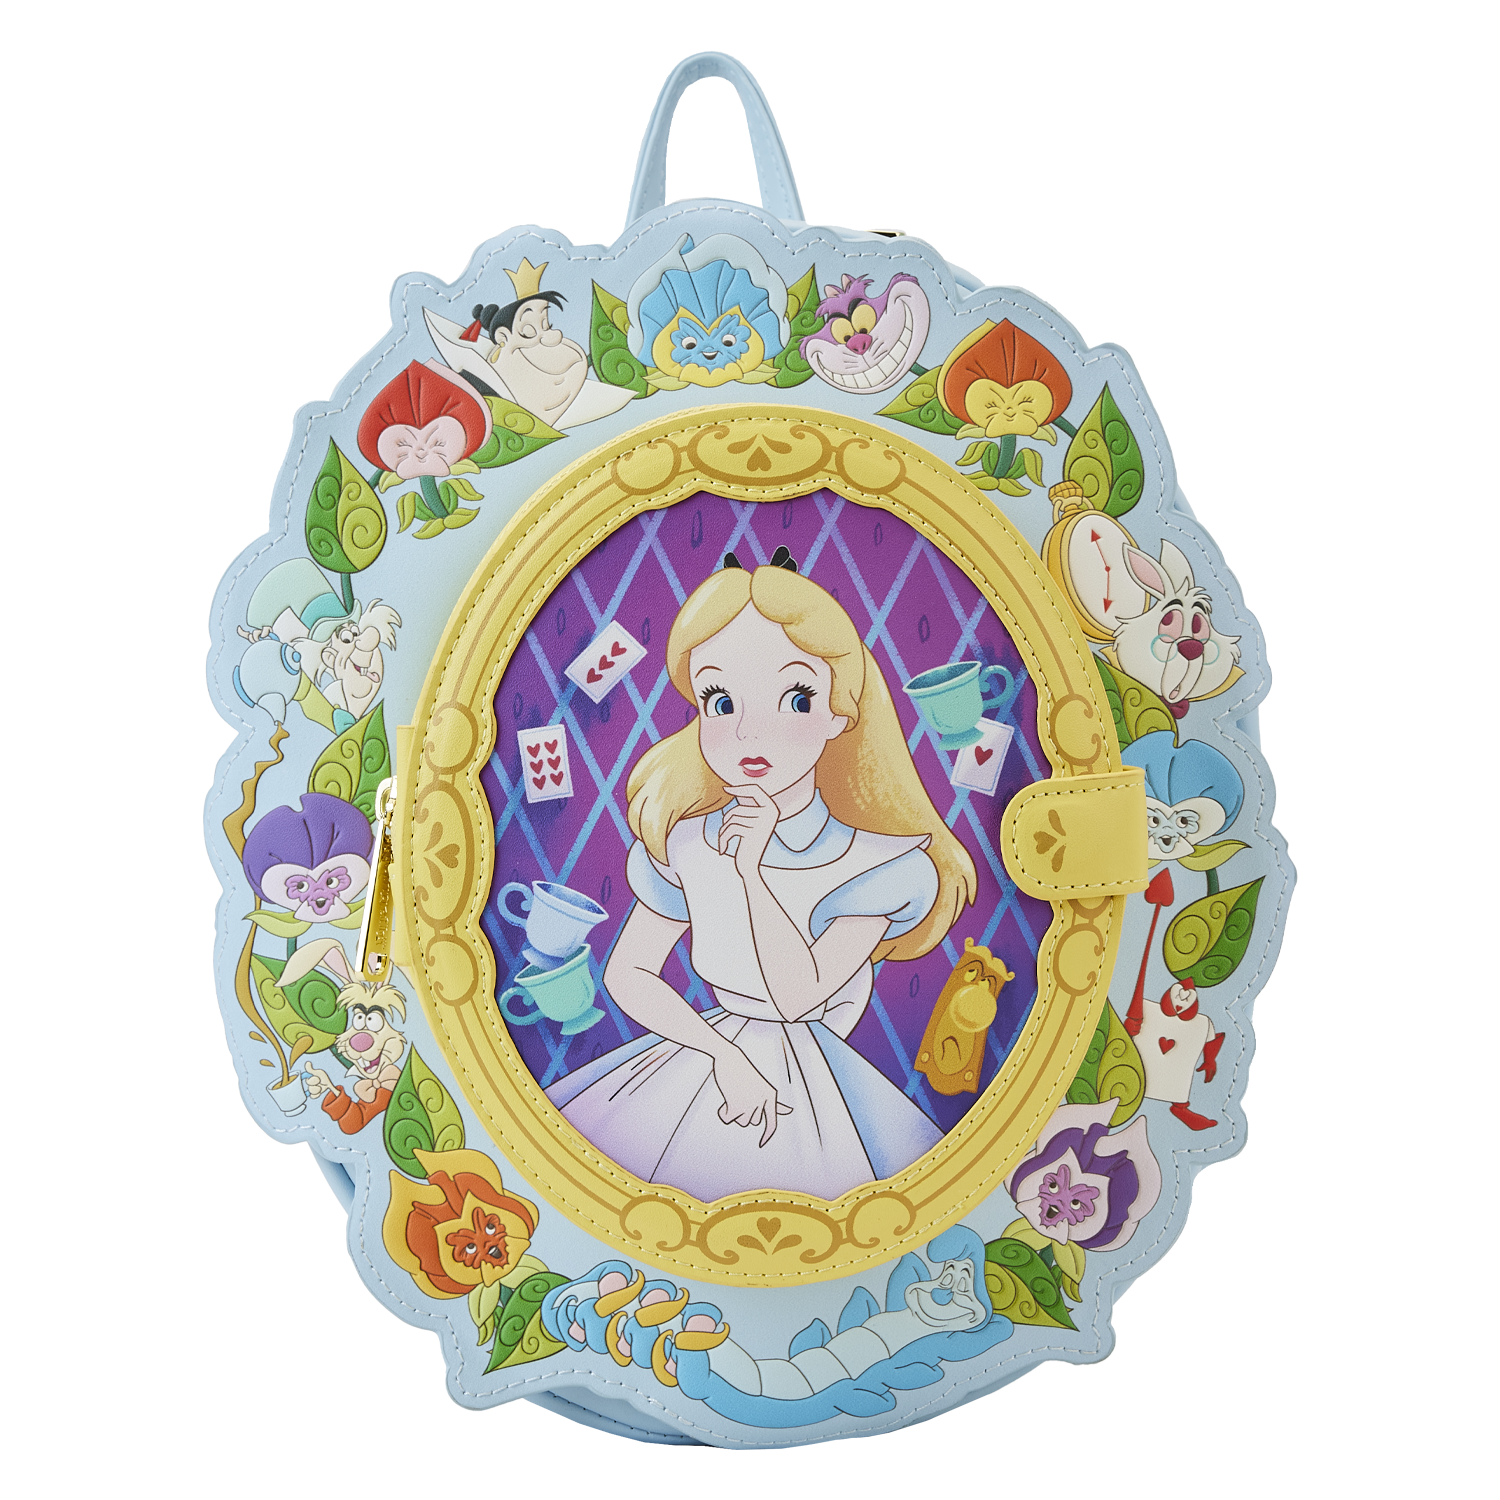 Alice in Wonderland Cameo Mini Backpack | Officially Licensed | Plastic/Vegan Leather | Loungefly